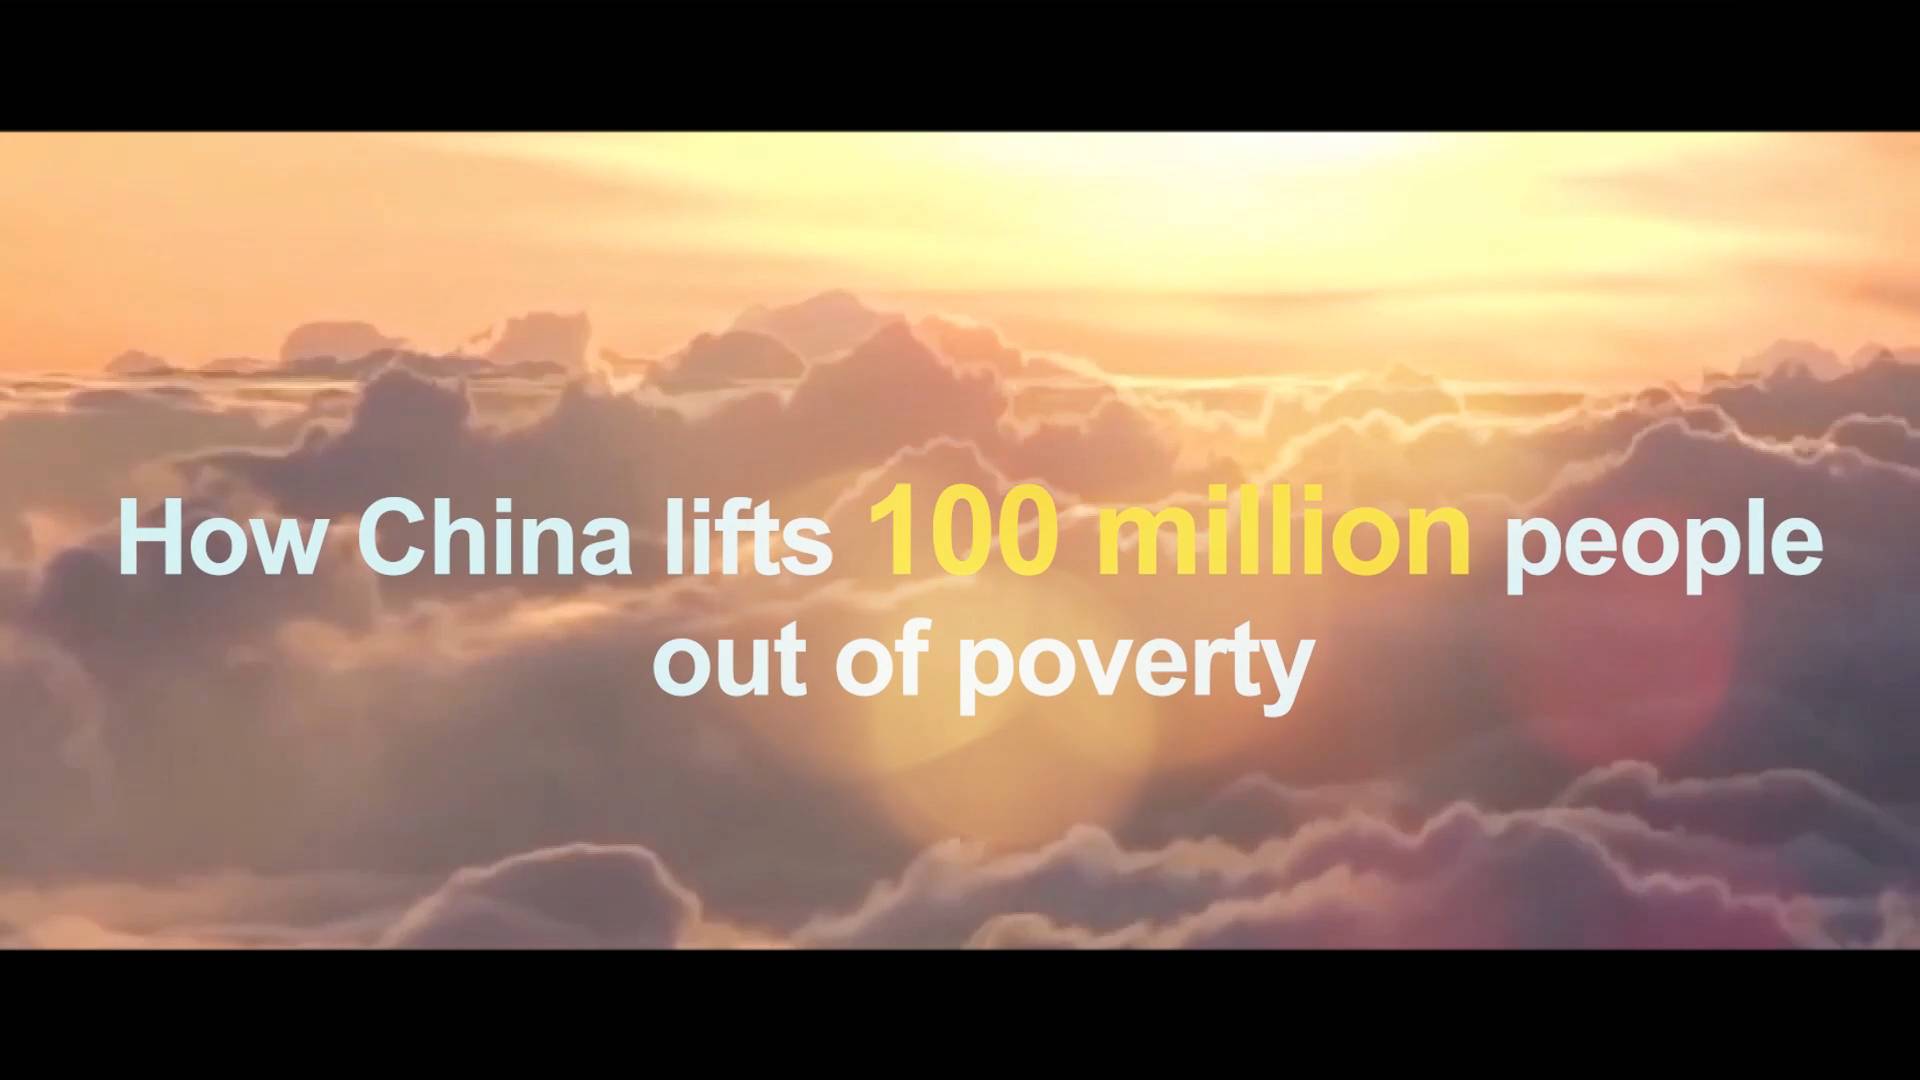 How China lifts 100 million people out of poverty | A mission of a century